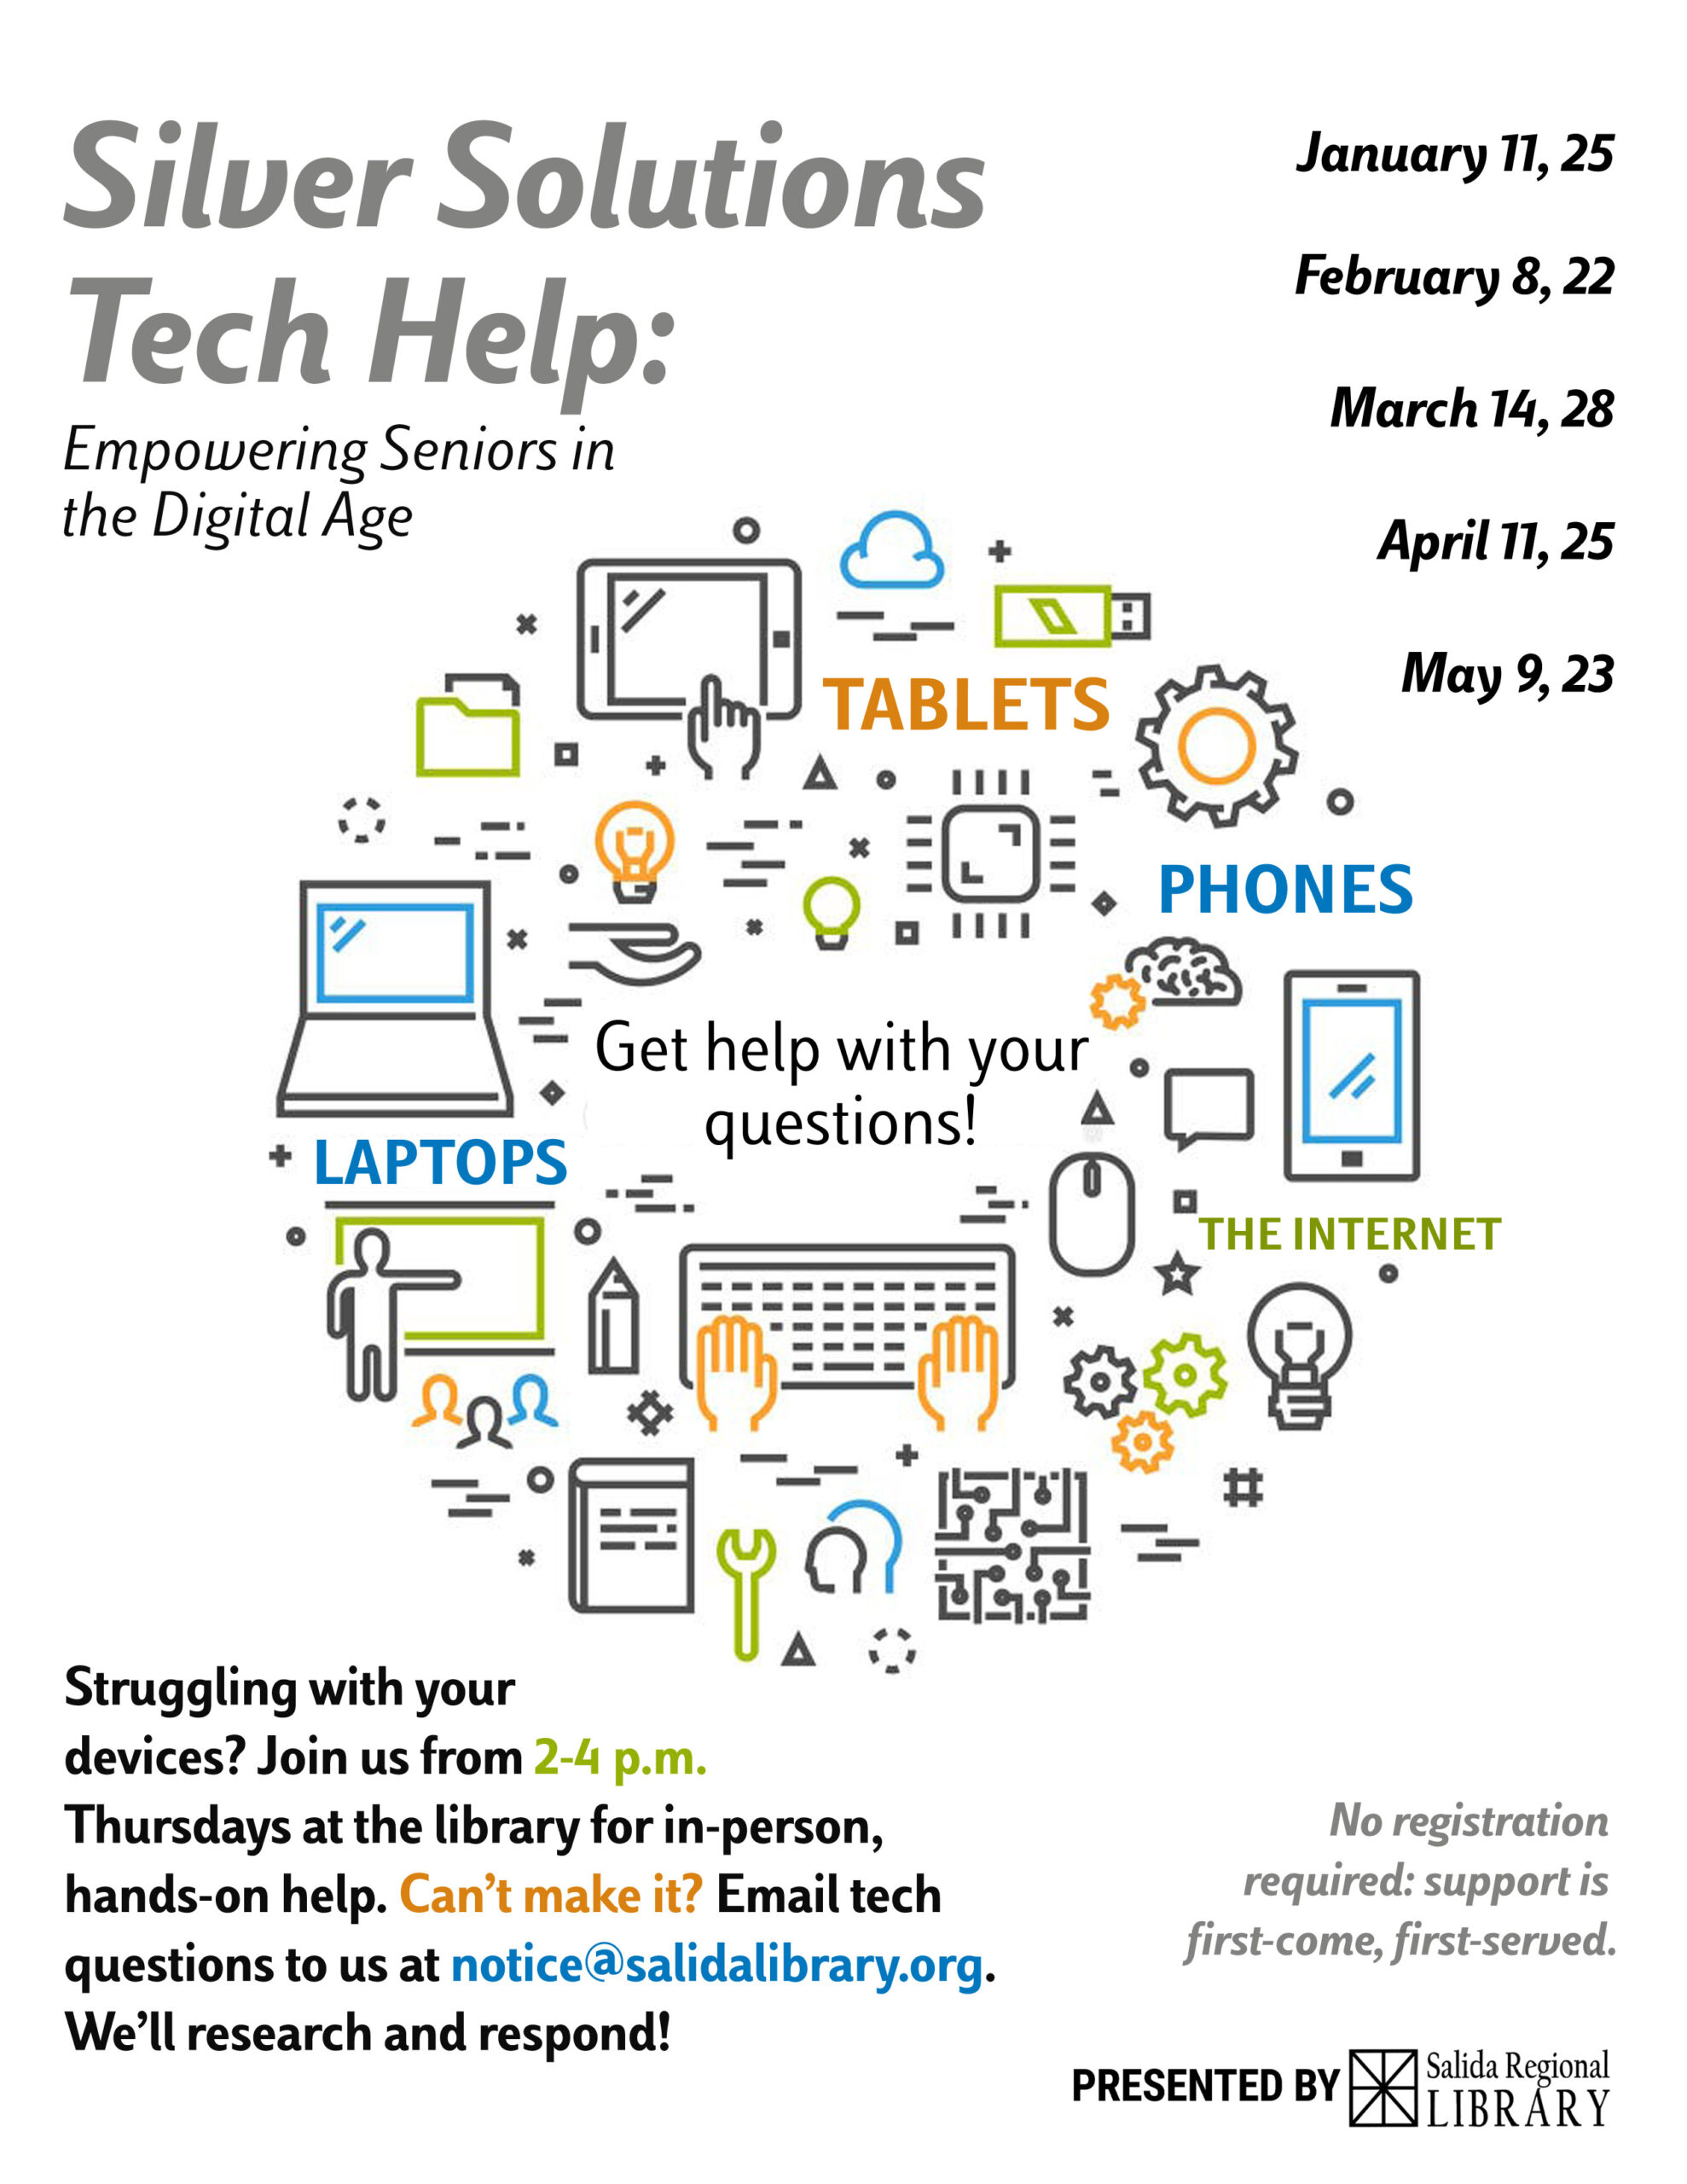 Silver Solutions Tech Help: Empowering Seniors in the Digital Age. January 11 and 25. February 8 and 22. March 14 and 28. April 11 and 25. May 9 and 23. Get Help with your questions! Struggling with your devices? Join us from 2-4 p.m. Thursdays at the library for in-person hands on help. Can't make it? Email tech questions to us at notice @ salida library.org. We'll research and respond! No registration required. Support is first come first served.